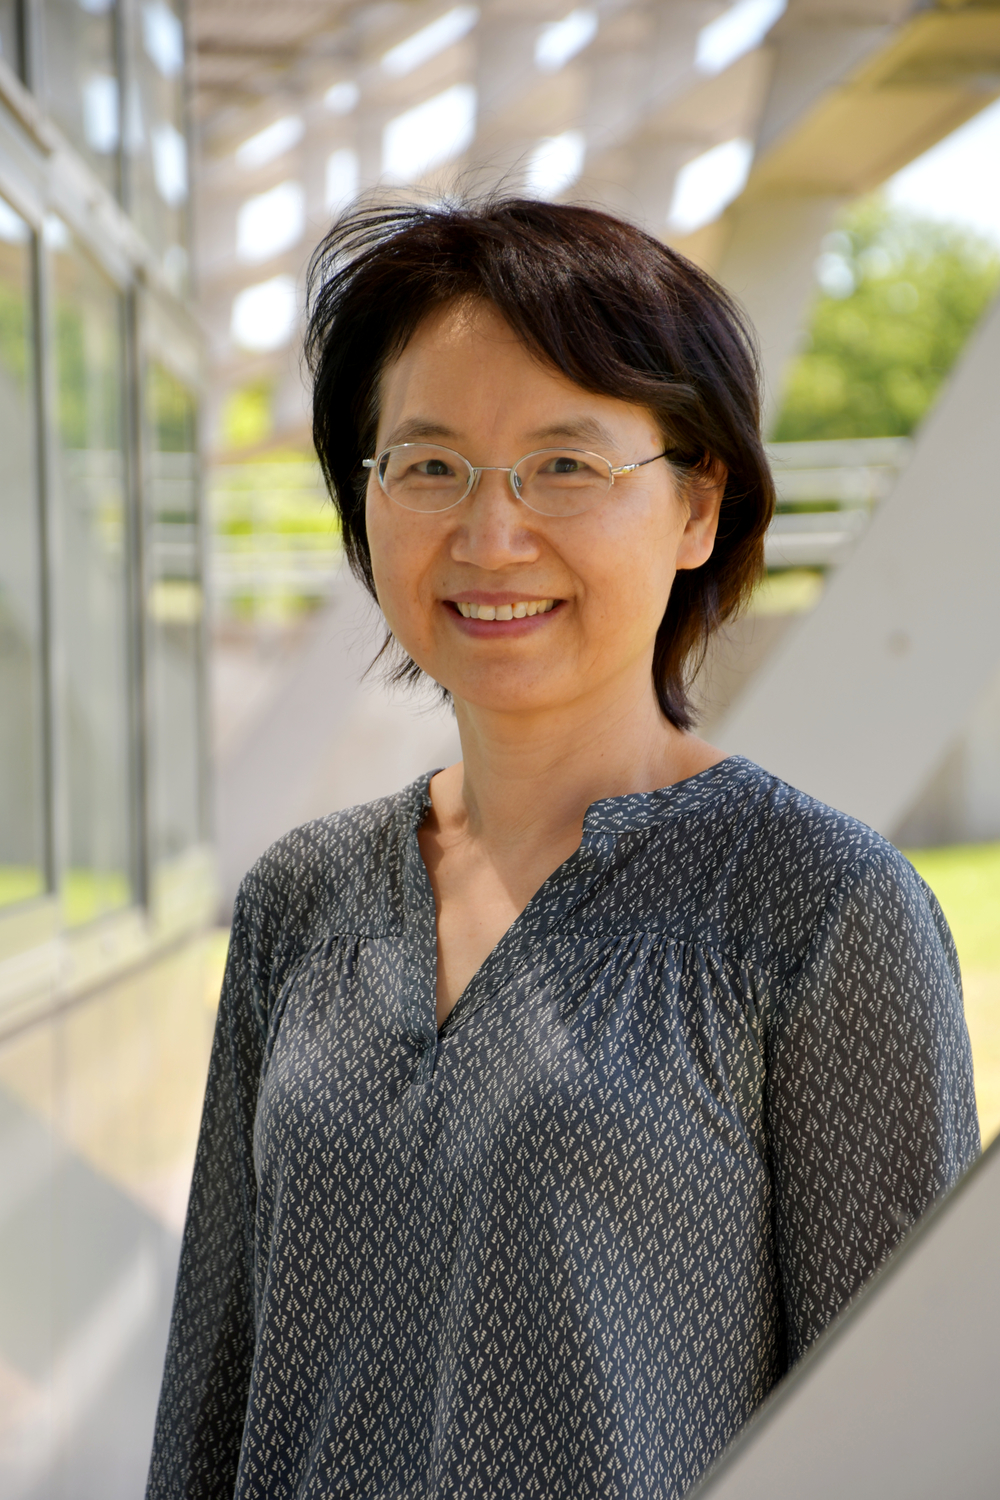 Professor Peijun Zhang, Director of eBIC at Diamond and Professor of Structural Biology at the University of Oxford